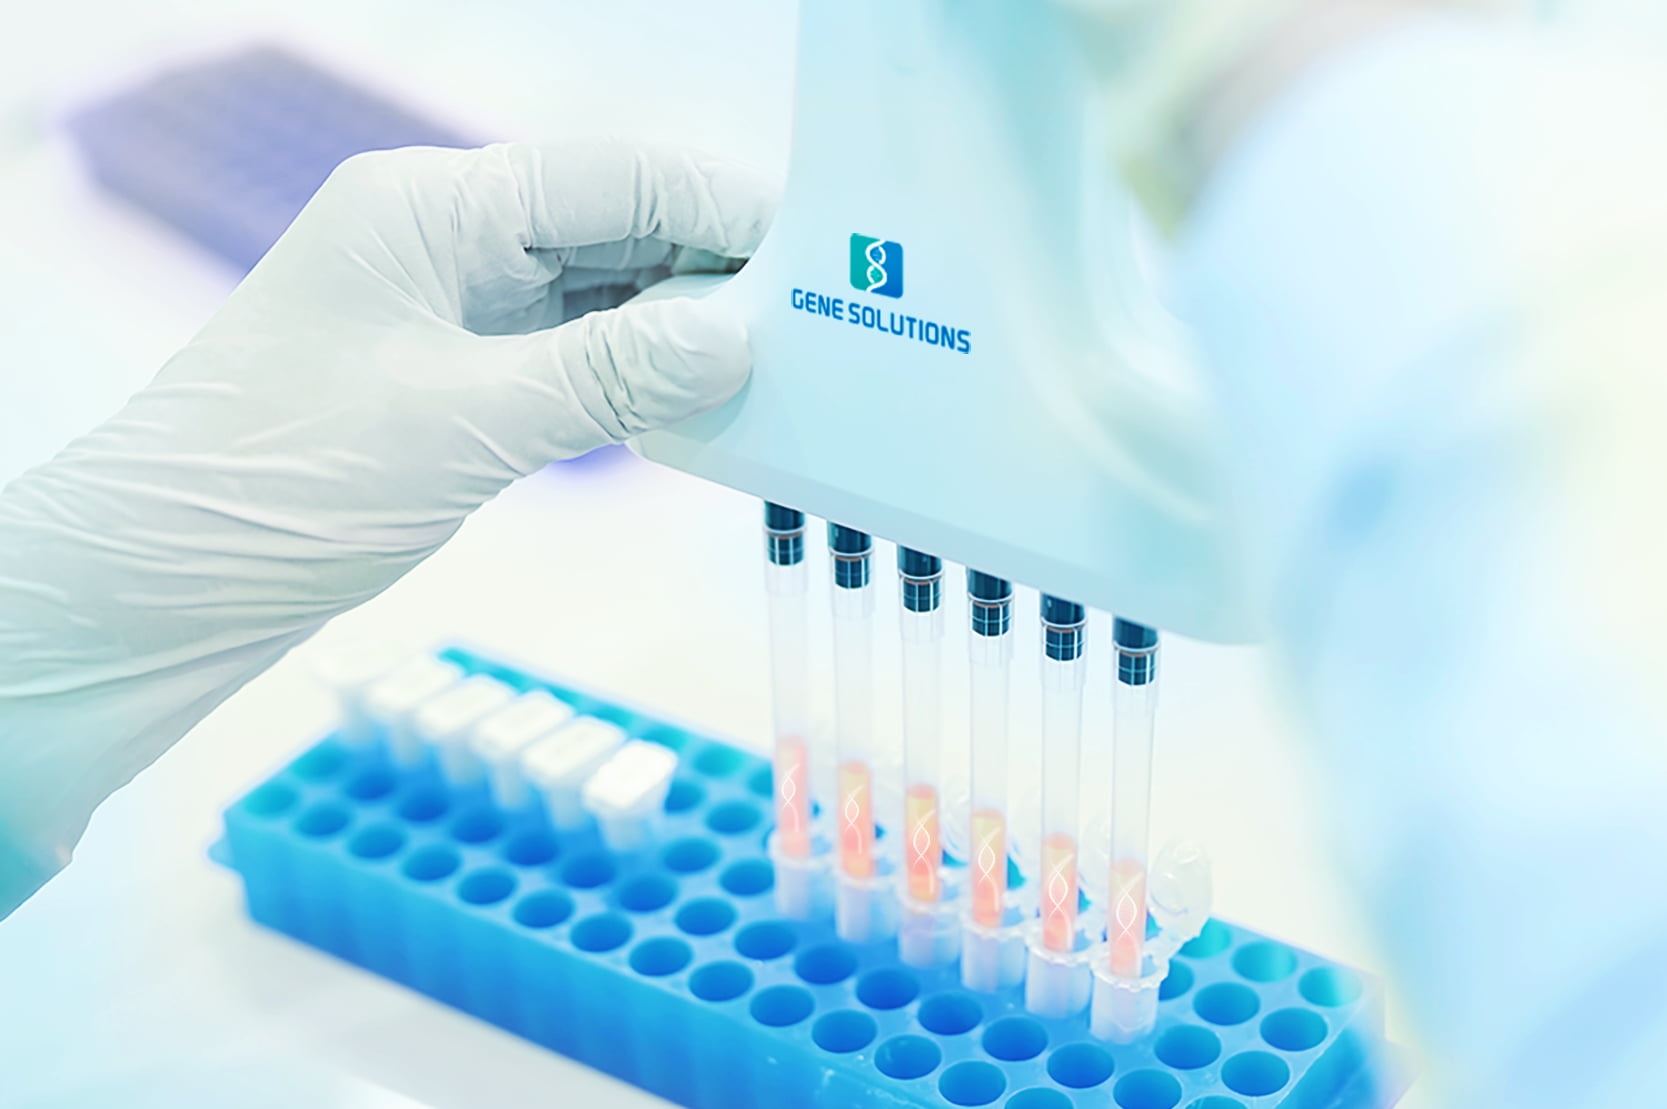 Gene Solutions secures $15 million from Mekong Capital